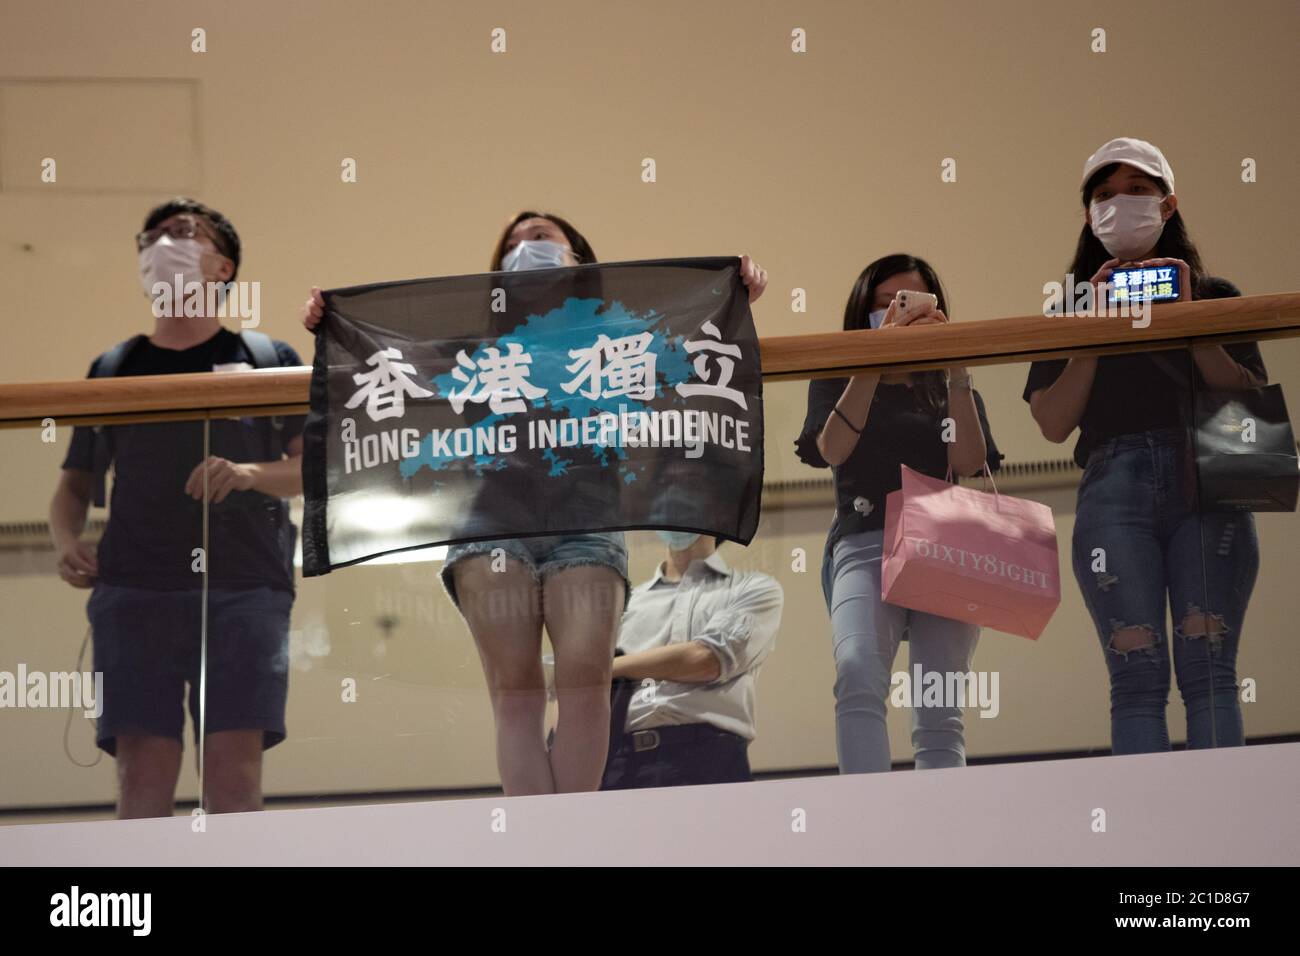 Hong Kong, Hong Kong. 15th June, 2020. Pro Democracy supporters hold Hong Kong Independence signs and chant slogans such as 'One Nation, One Hong Kong' as members of the public queue for hours to pay respects to Marco Leung Ling-kit in Hong Kong Hong Kong, S.A.R., June 06, 2020. Marco Leung Ling-kit fell to his death on, June 15, 2019. (Photo by Simon Jankowski/Sipa USA) Credit: Sipa USA/Alamy Live News Stock Photo